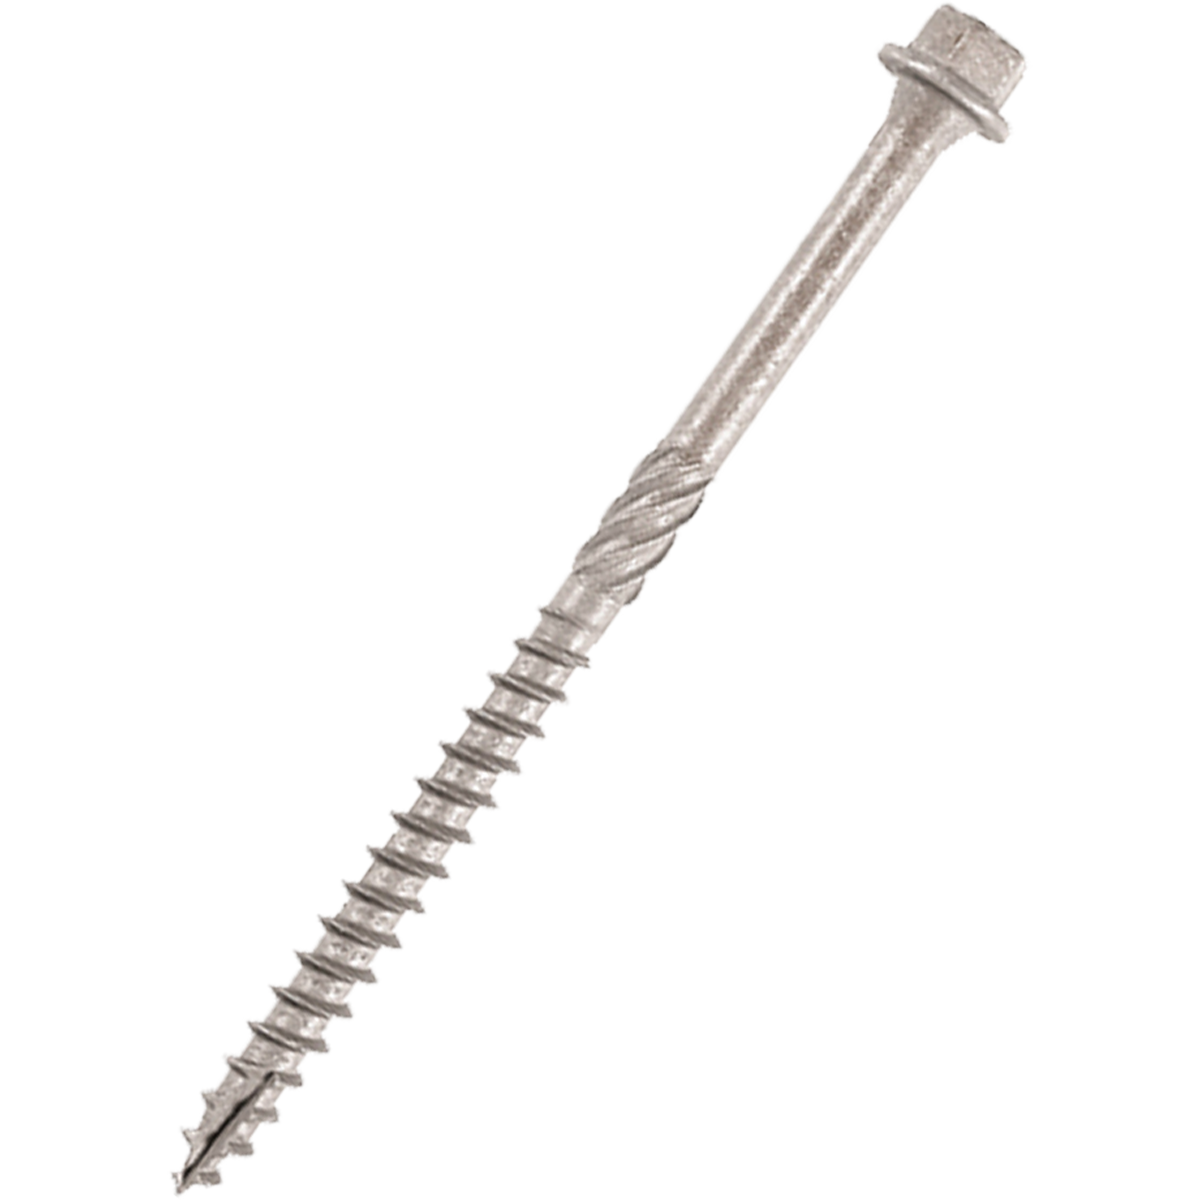 Structural Timber Frame Construction Screws manufactured in A4 stainless steel. Available in a selection of lengths at competitive prices